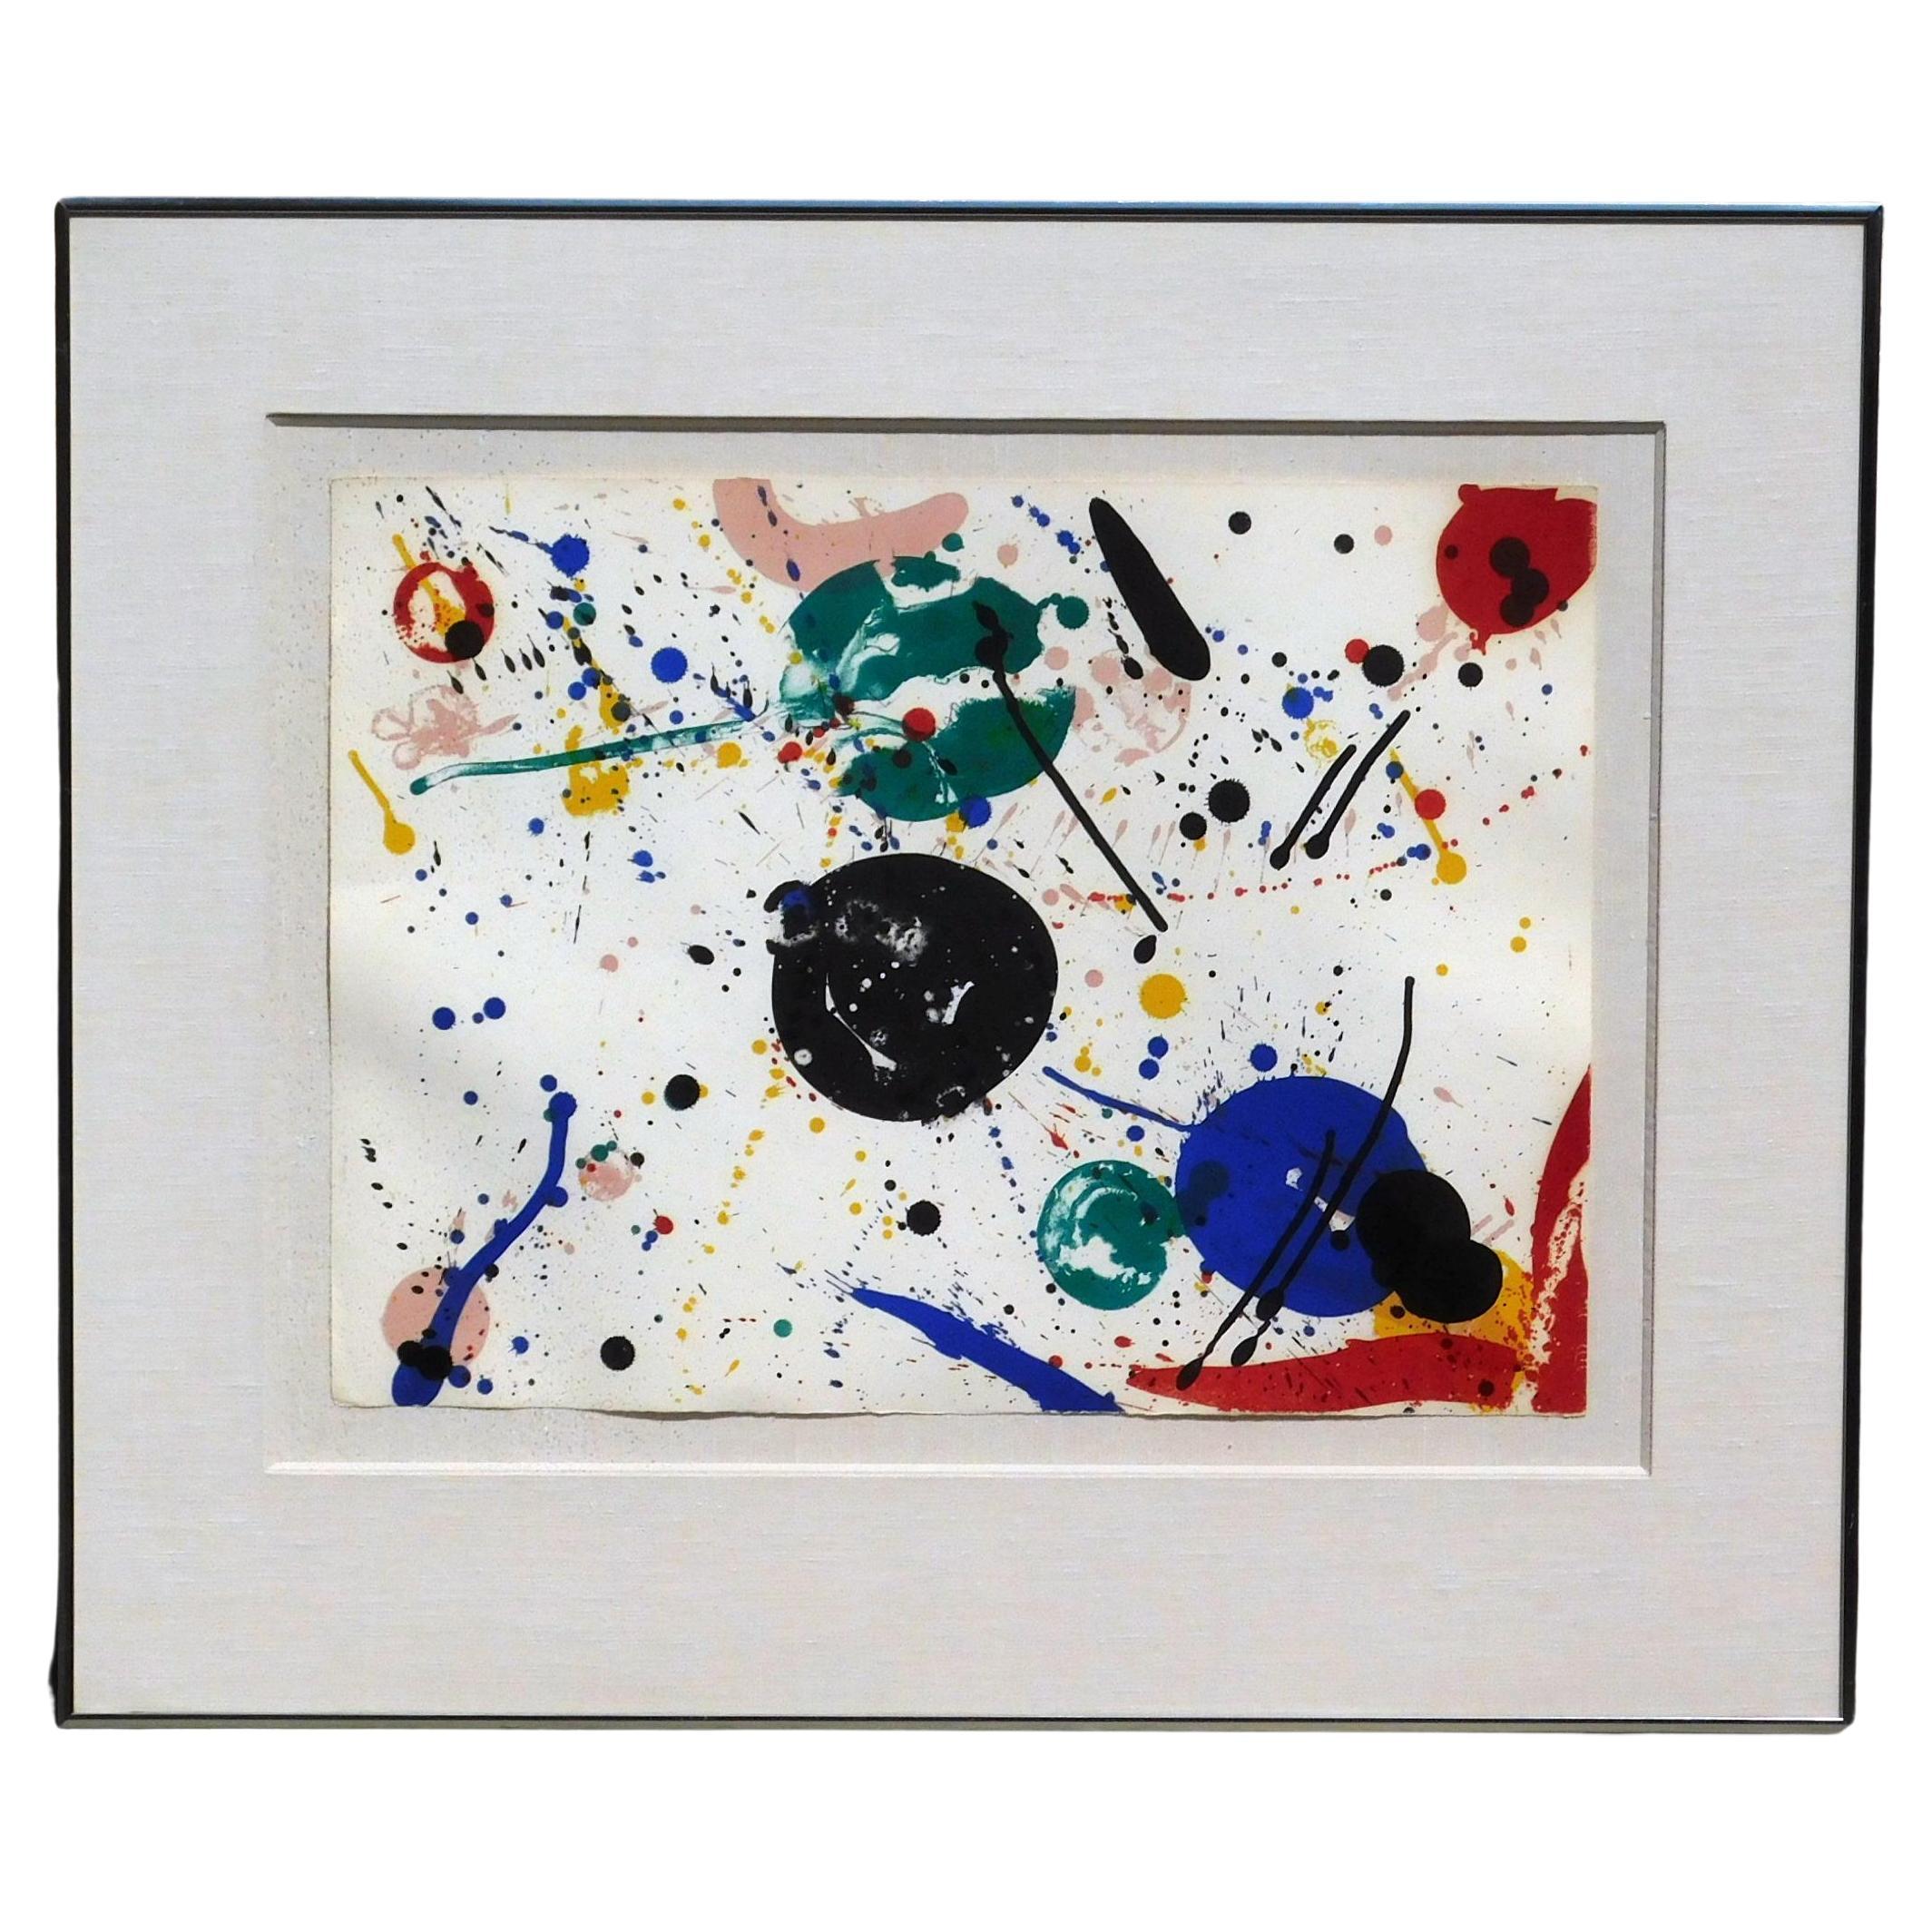 Sam Francis Original Color Lithograph, 1965 - “Variant of Fifty” For Sale